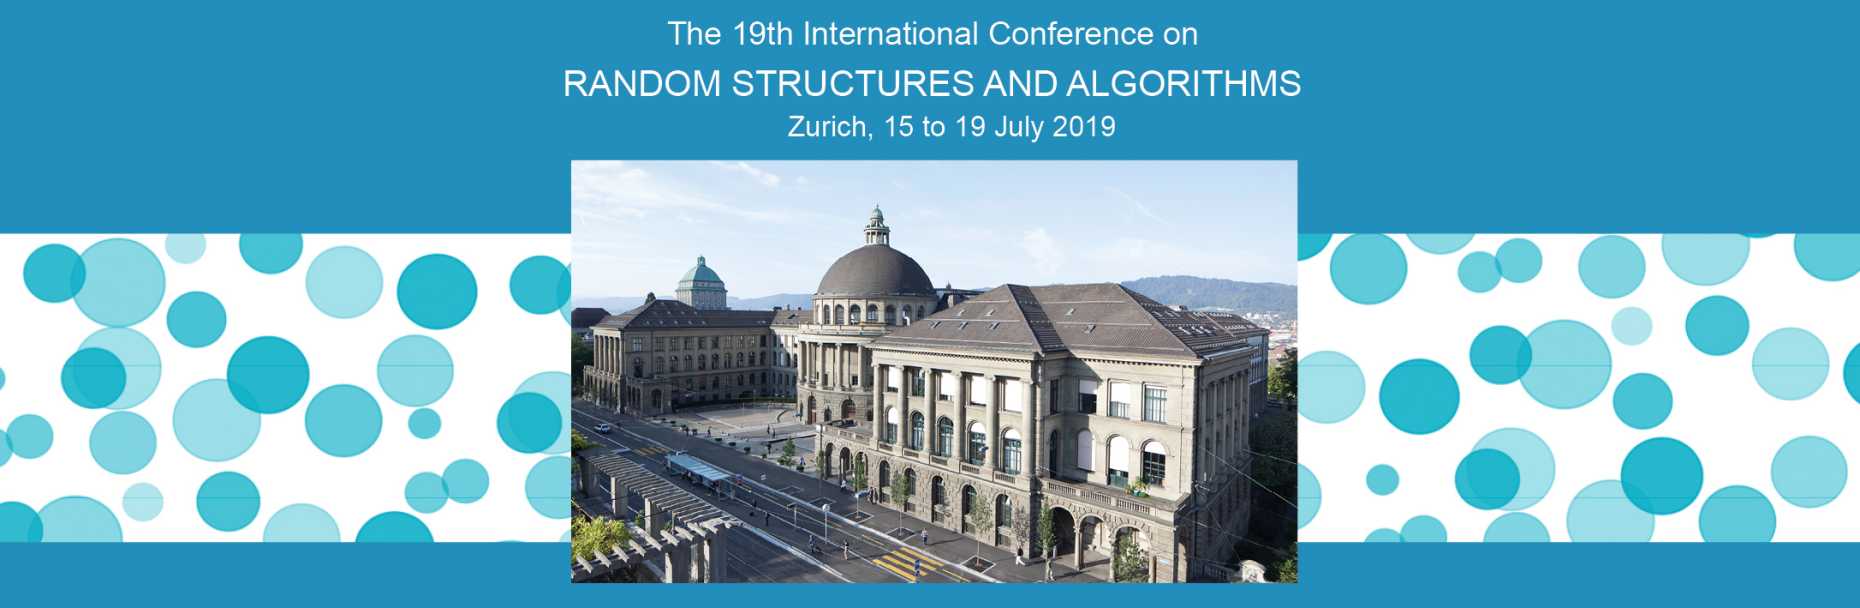 The 19th Int. Conference on Random Structures and Algorithms